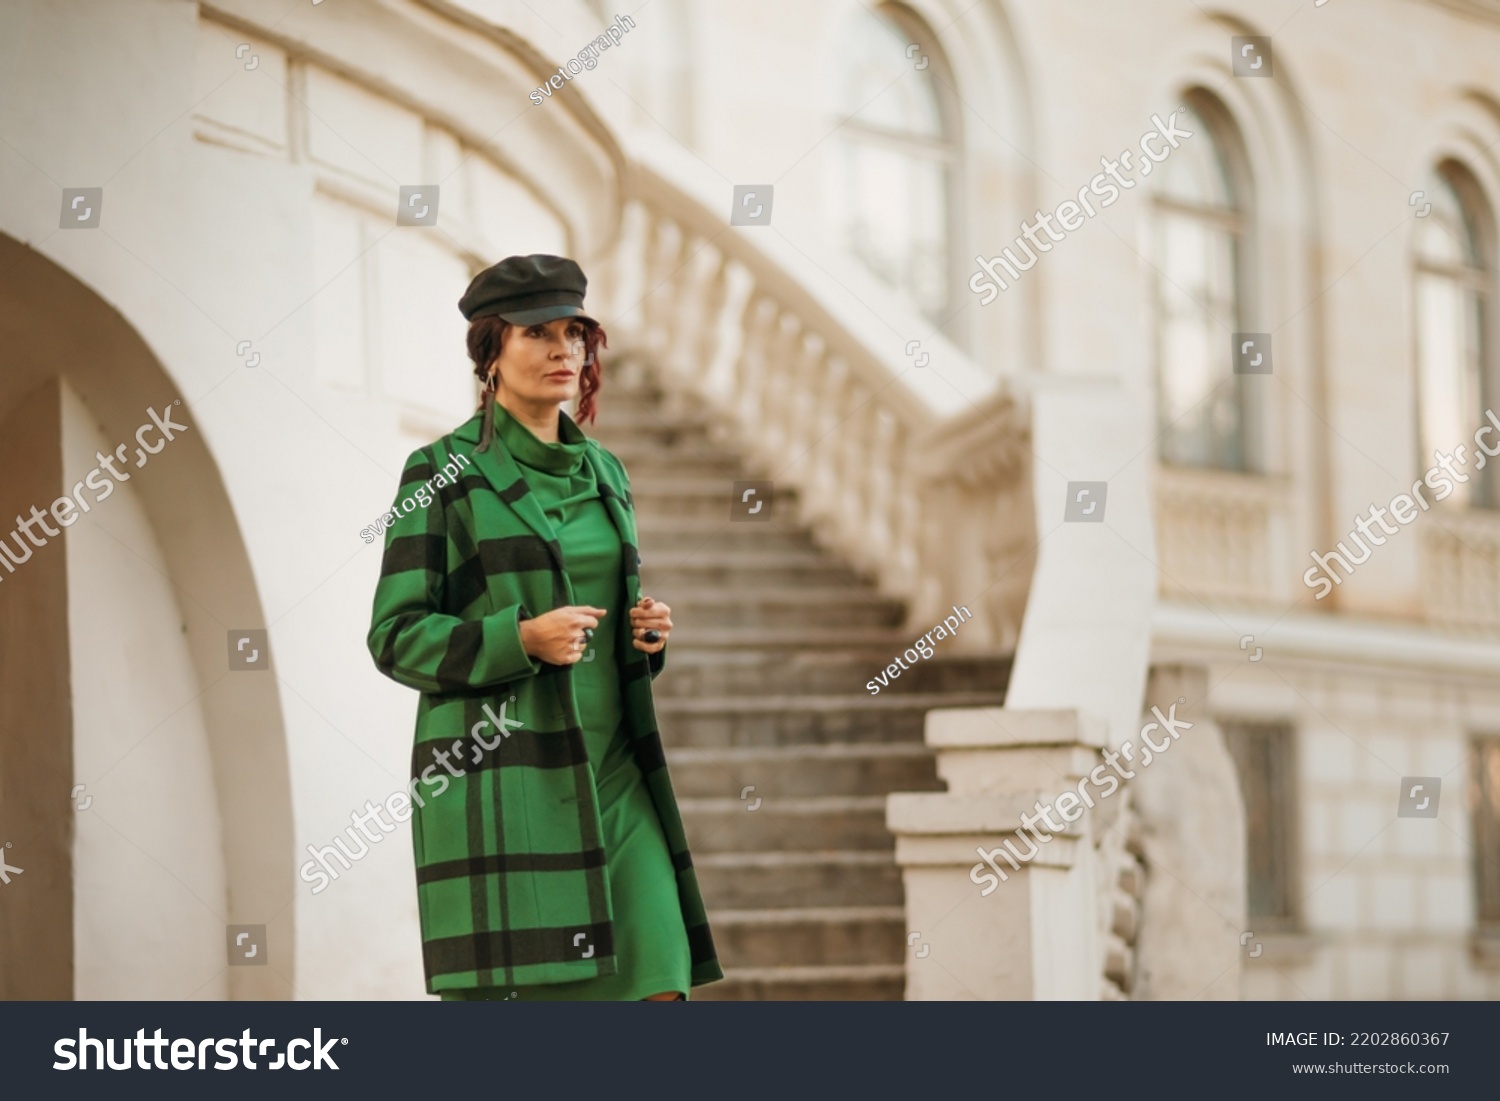 Outdoor fashion portrait of an elegant fashionable brunette woman, model in a stylish cap, green dress, posing at sunset in a European city in autumn. #2202860367